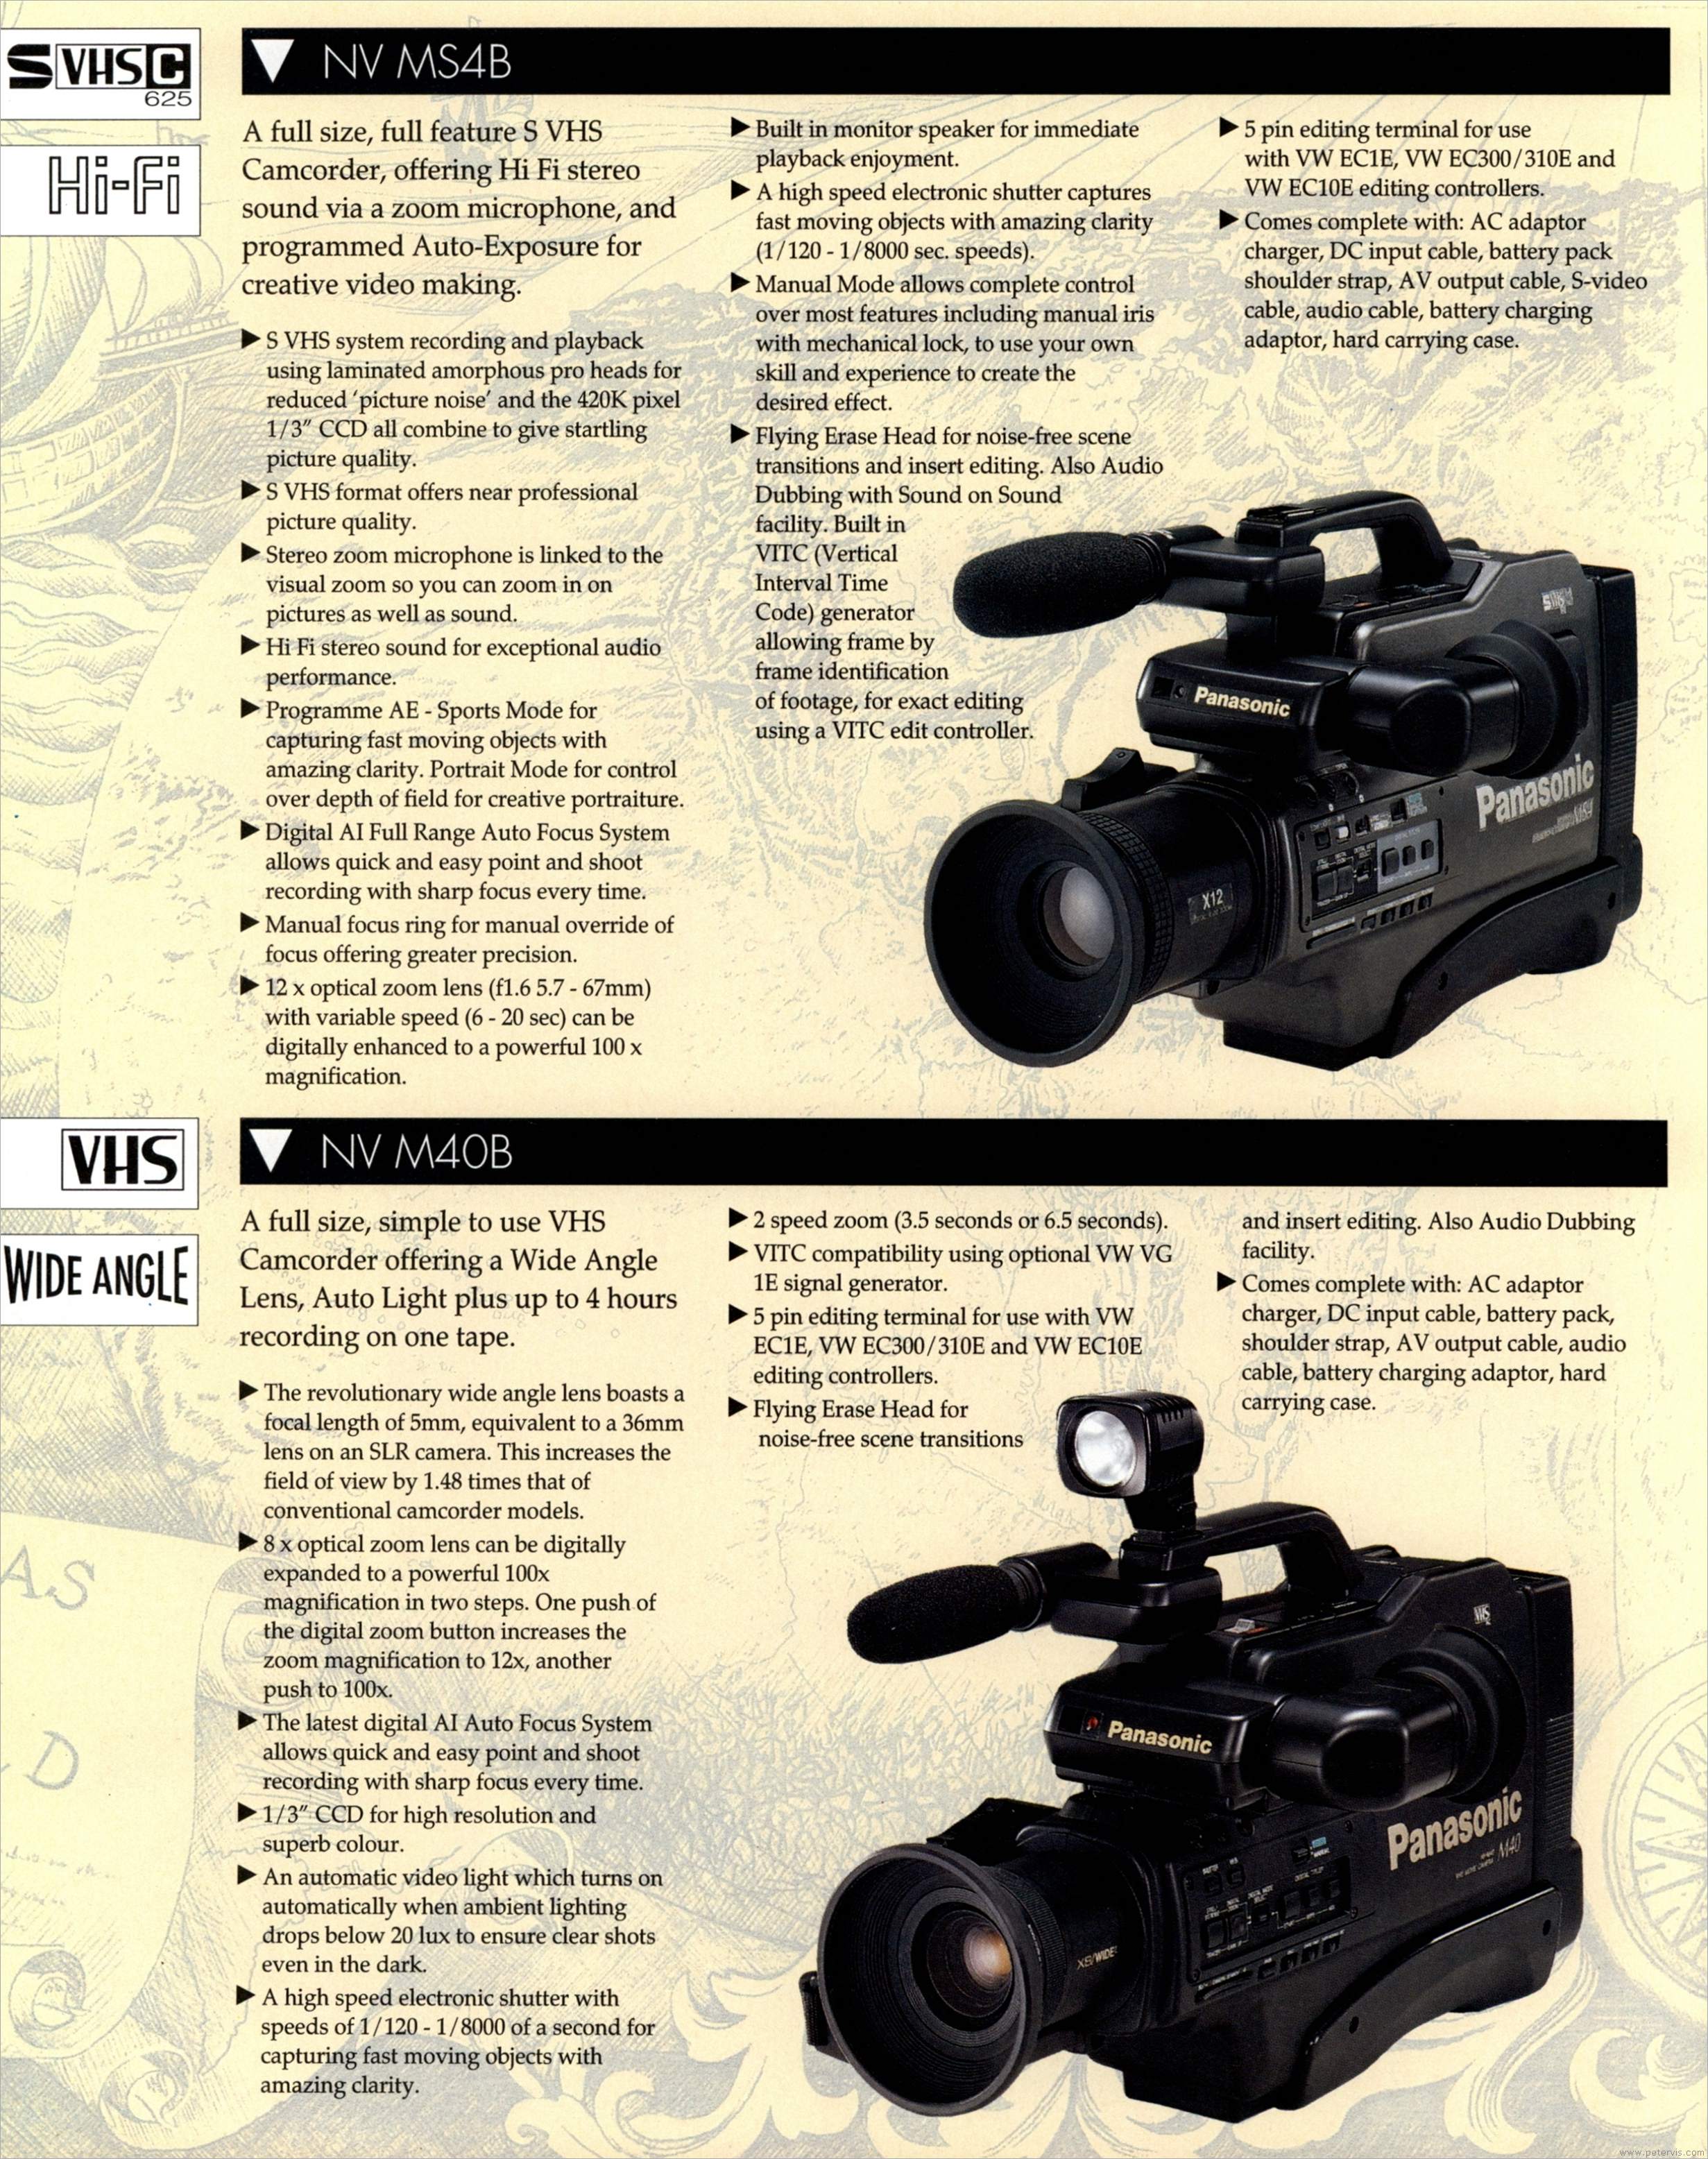 NV-MS4B and NV-M40B Camcorders